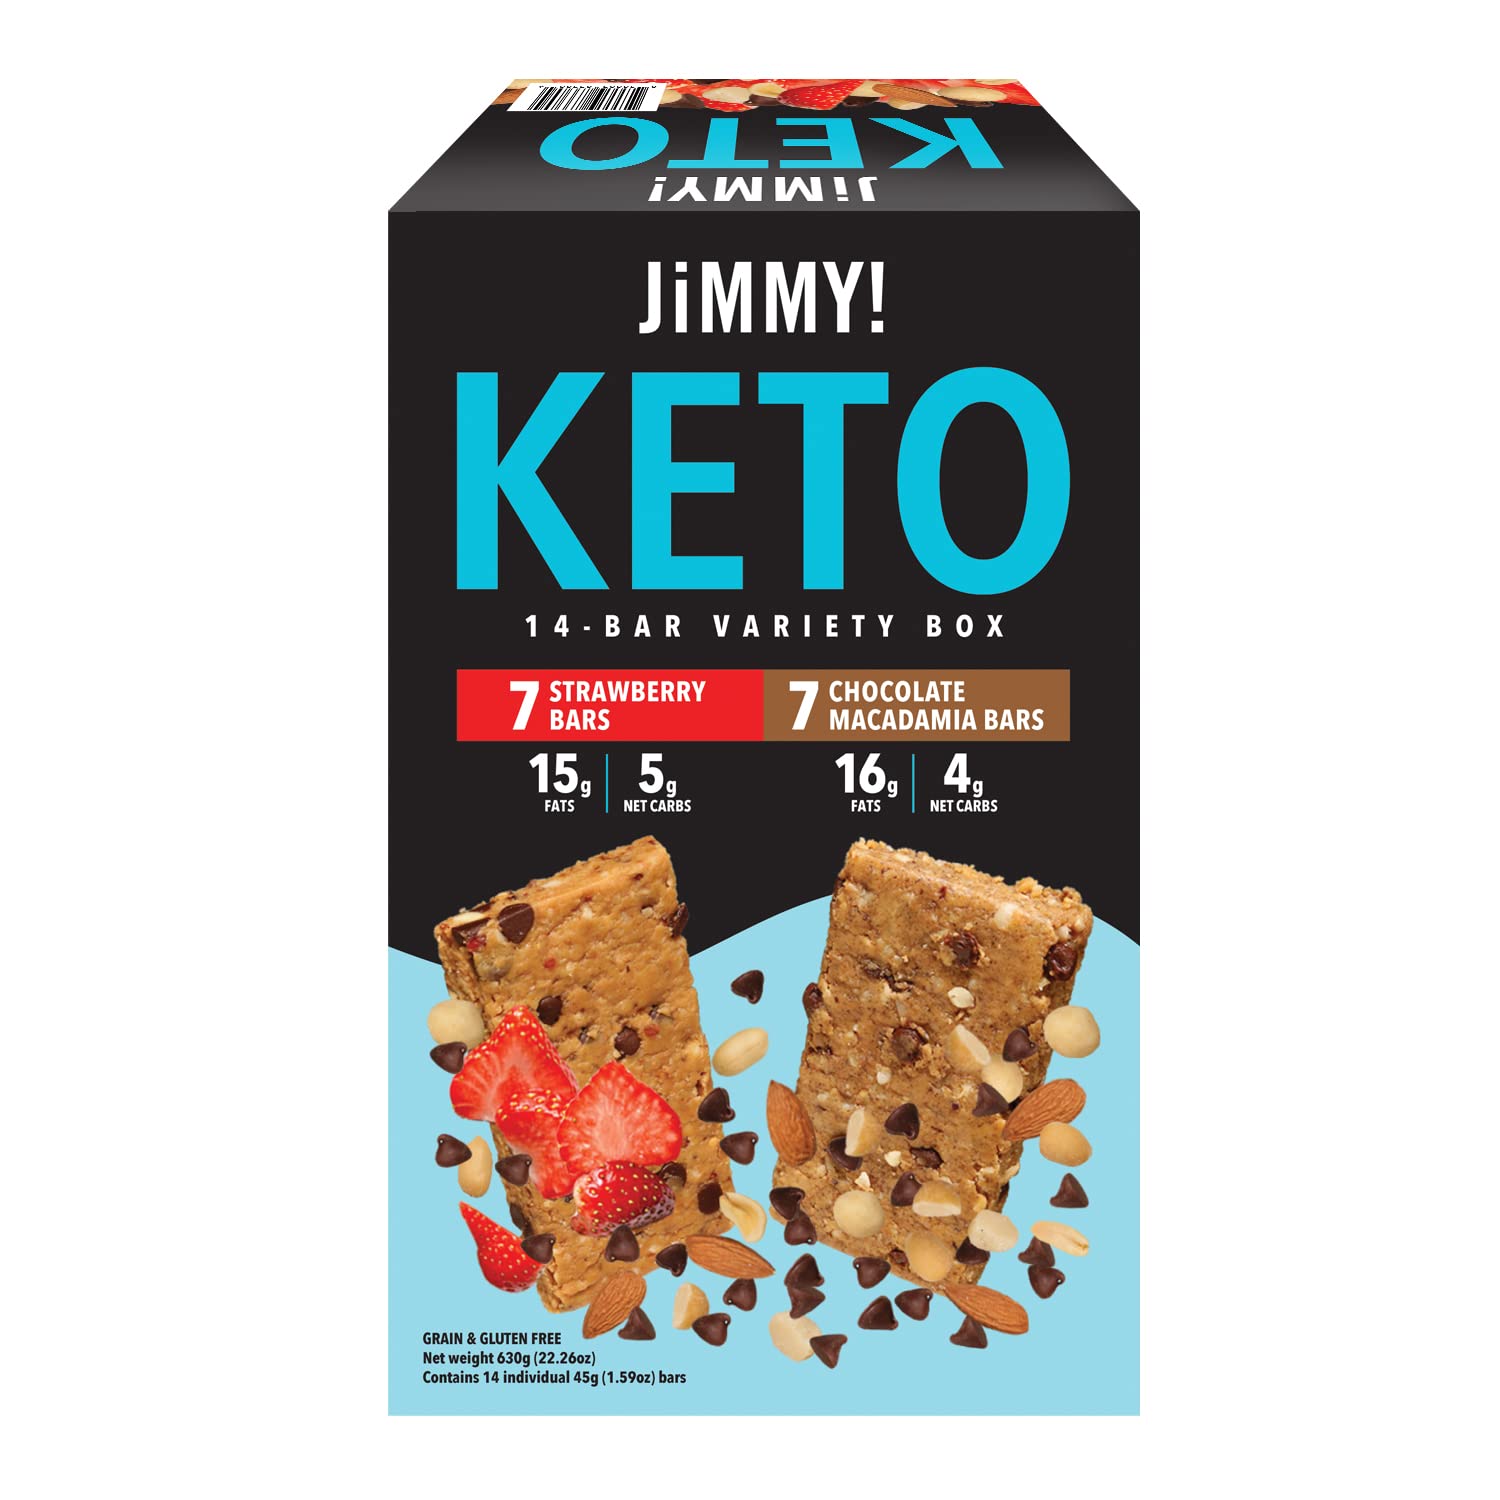 JiMMY! Keto Protein Bar, Keto Friendly, Variety Pack, 14 Count - Varie1.65 Pounds